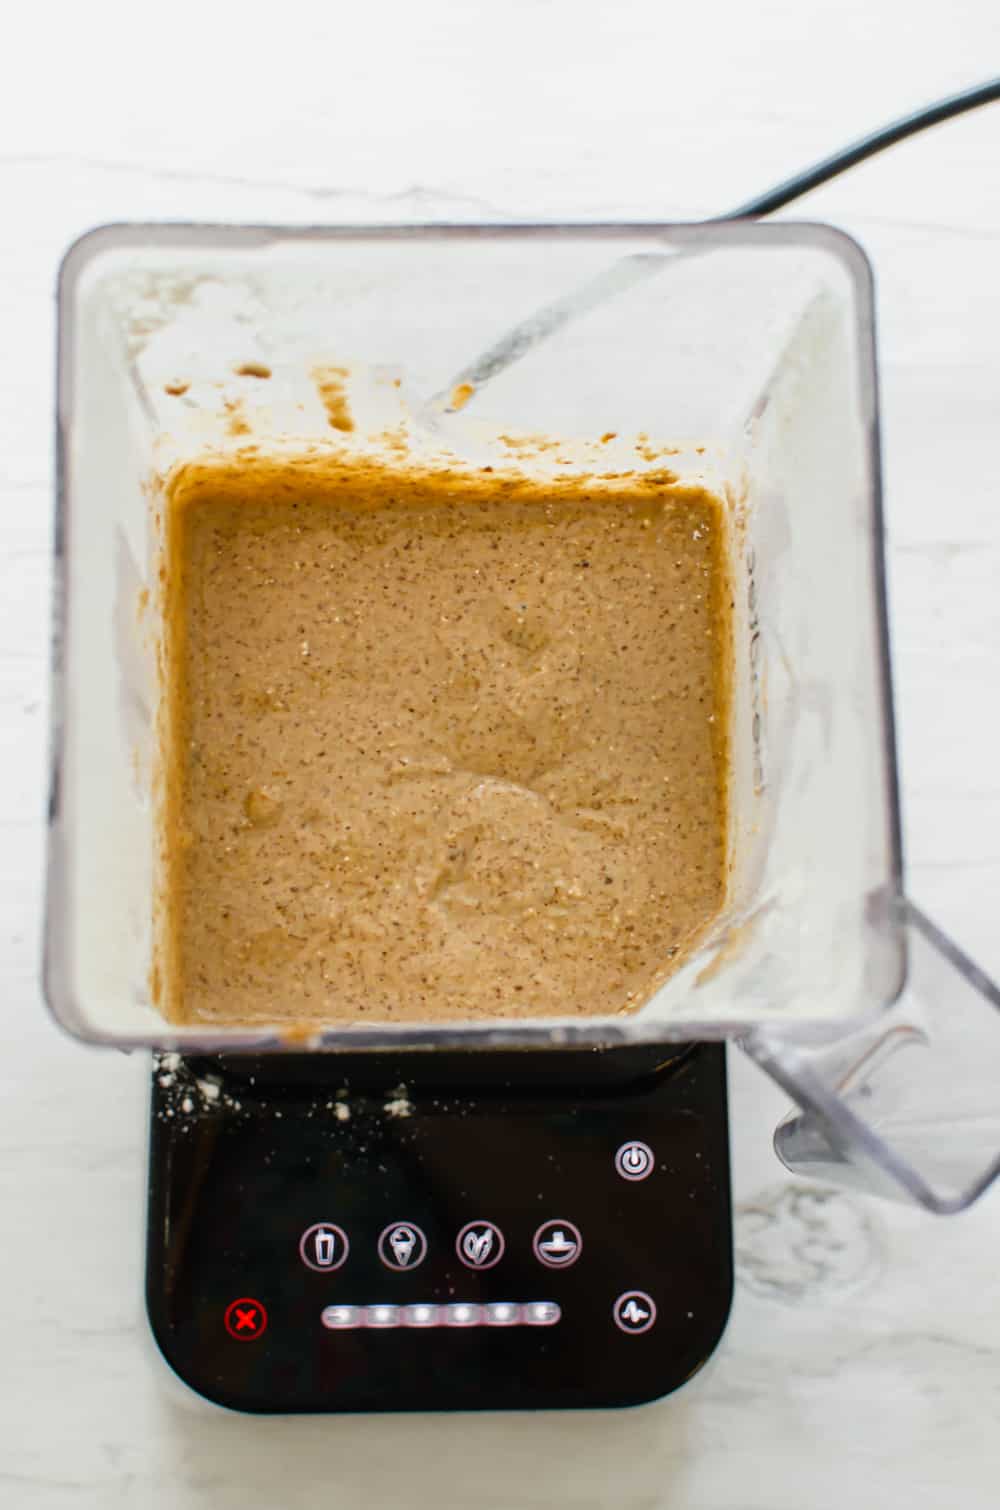 Gluten-free banana muffin ingredients blended up in a blender.